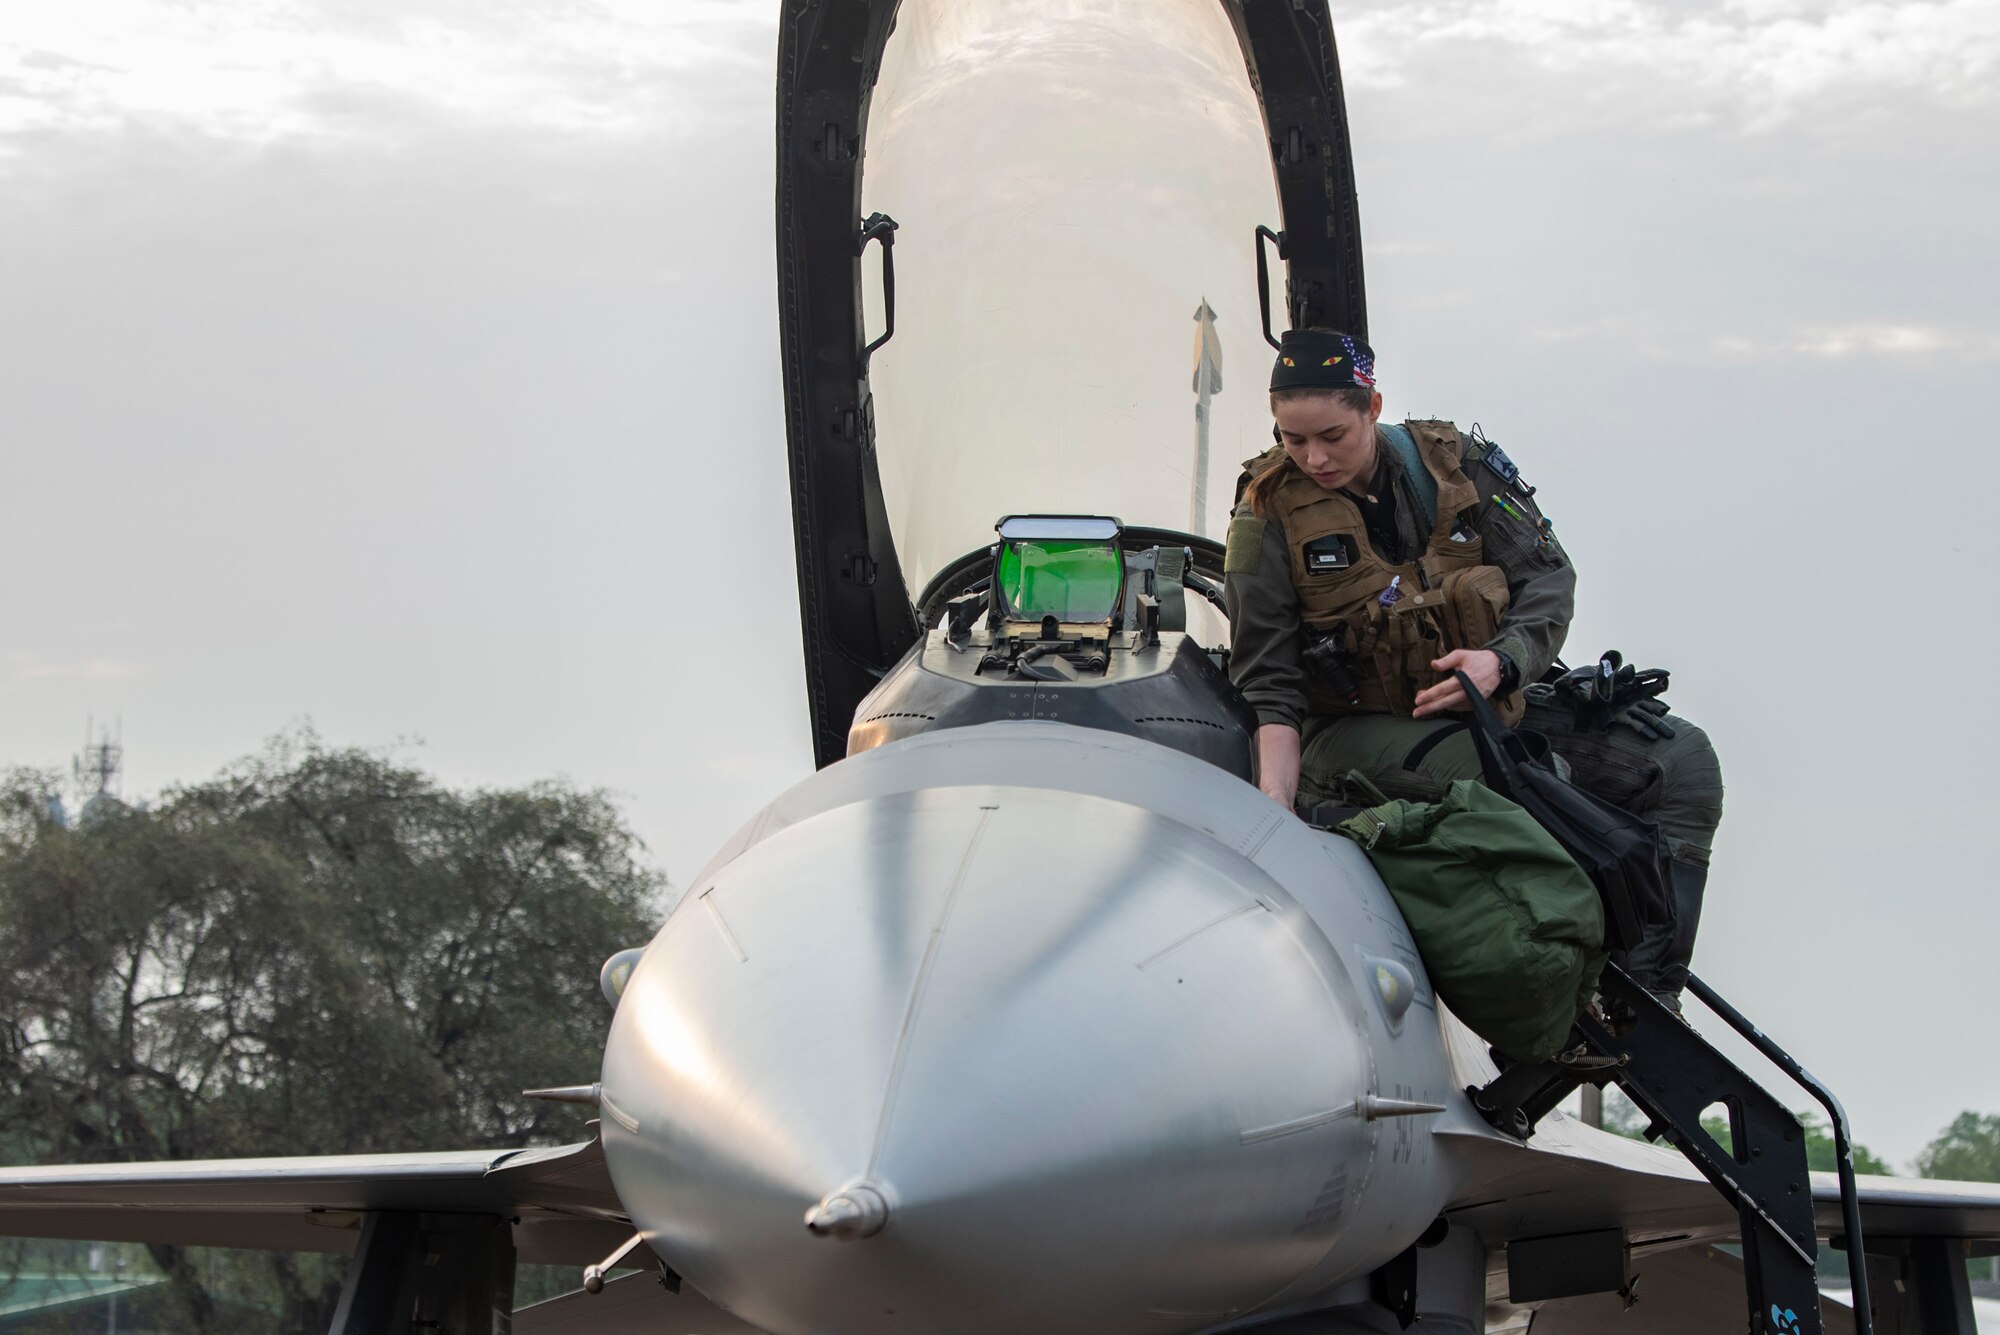 First Lt. Samantha “Force” Colombo, 35th Fighter Squadron pilot, enters an F-16 Fighting Falcon for flight during Cope Tiger 2022 at Korat Royal Thai Air Base, Thailand, March 18,2022. Female fighter pilots officially started flying for the U.S. Air Force in the 1990s. (U.S. Air Force photo by Staff Sgt. Jesenia Landaverde)